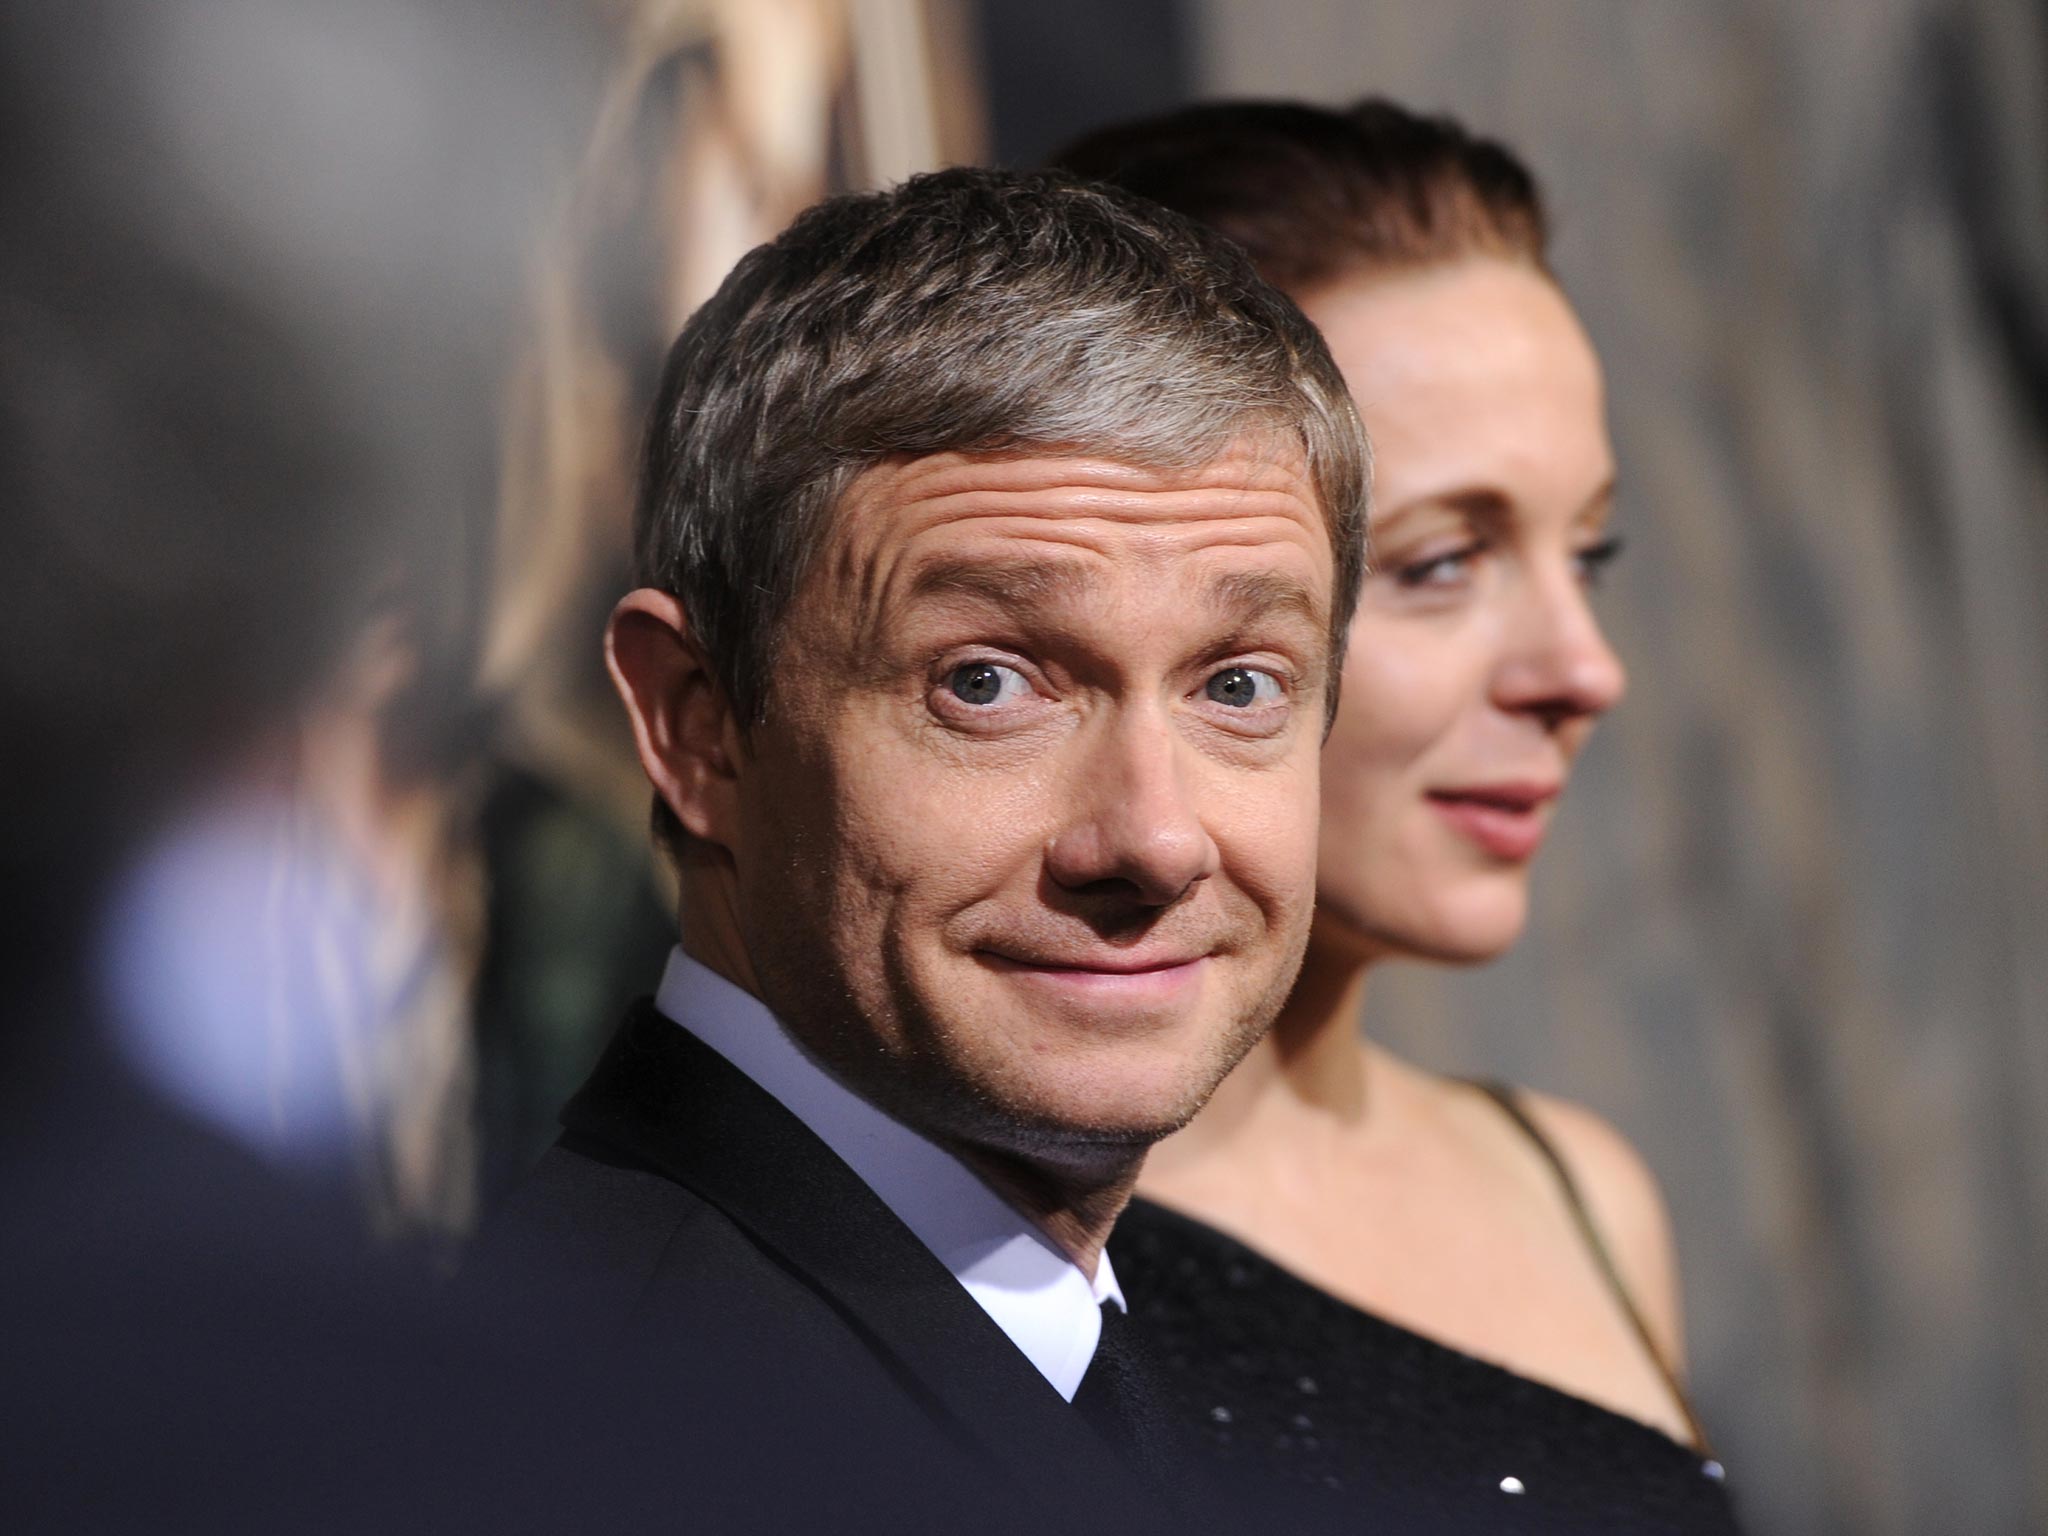 Martin Freeman would rather bare all when filming nude scenes